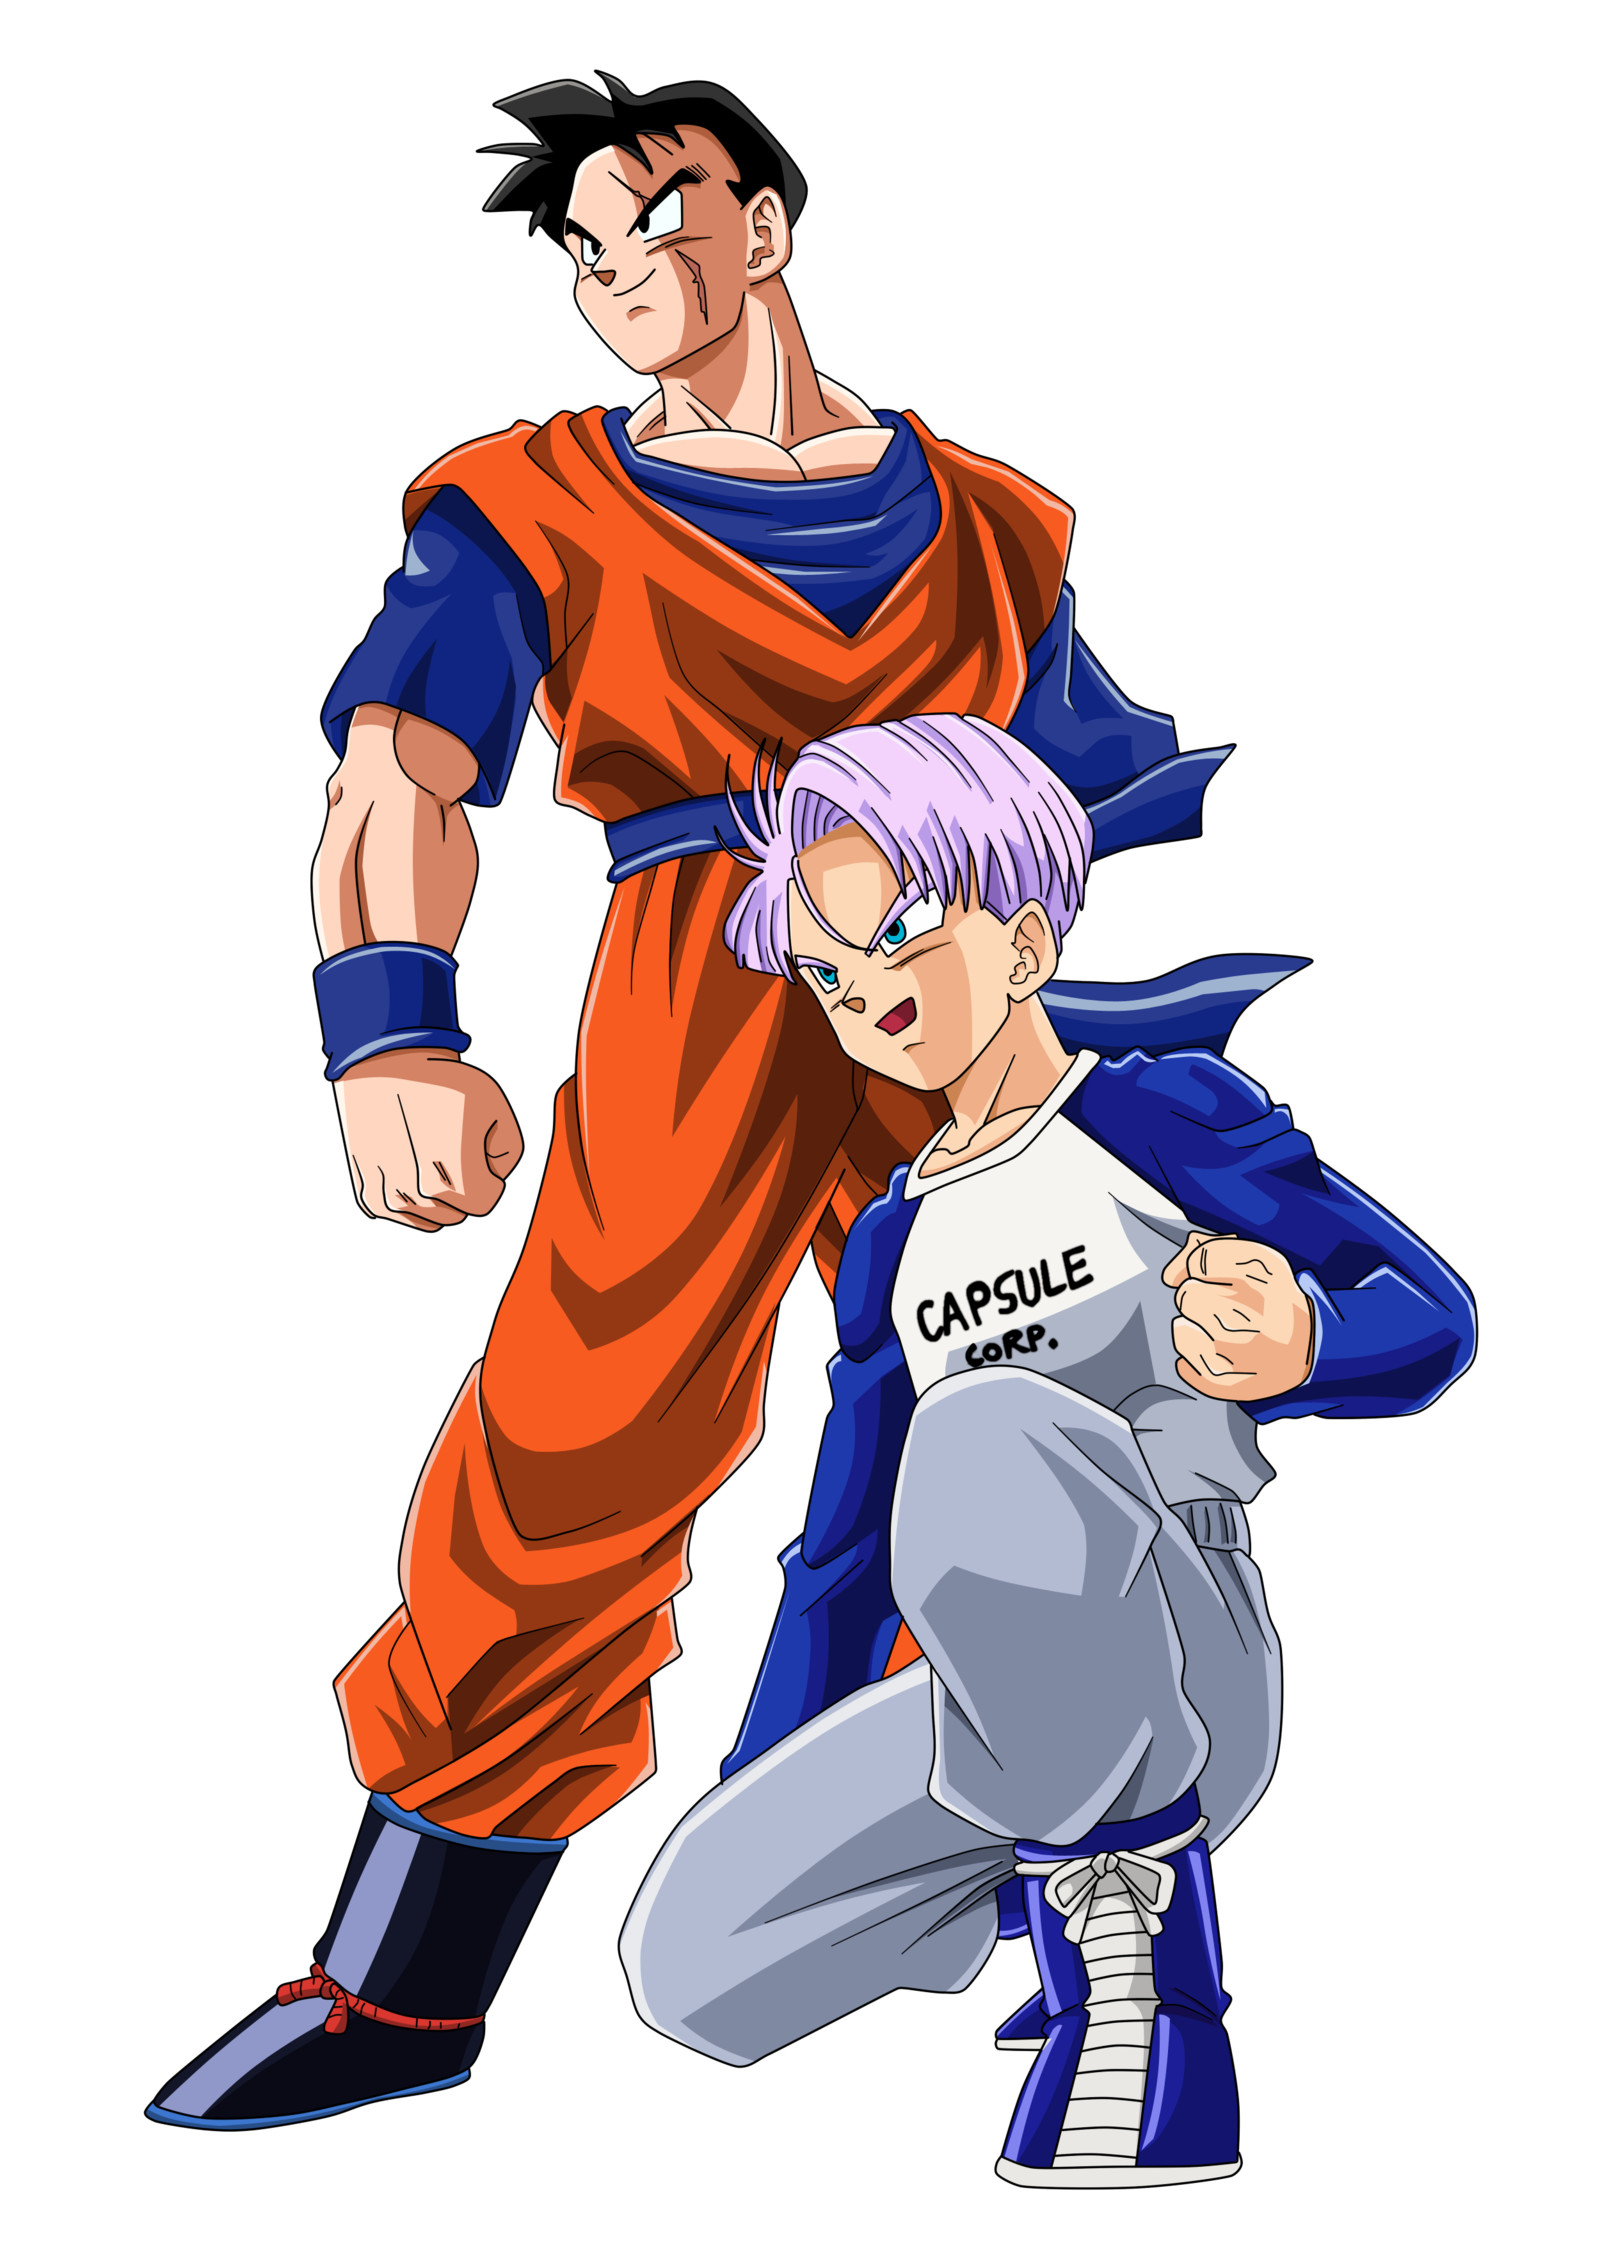 Future Gohan and Trunks Color by BoScha196 on DeviantArt – Visit now for 3D Dragon Ball